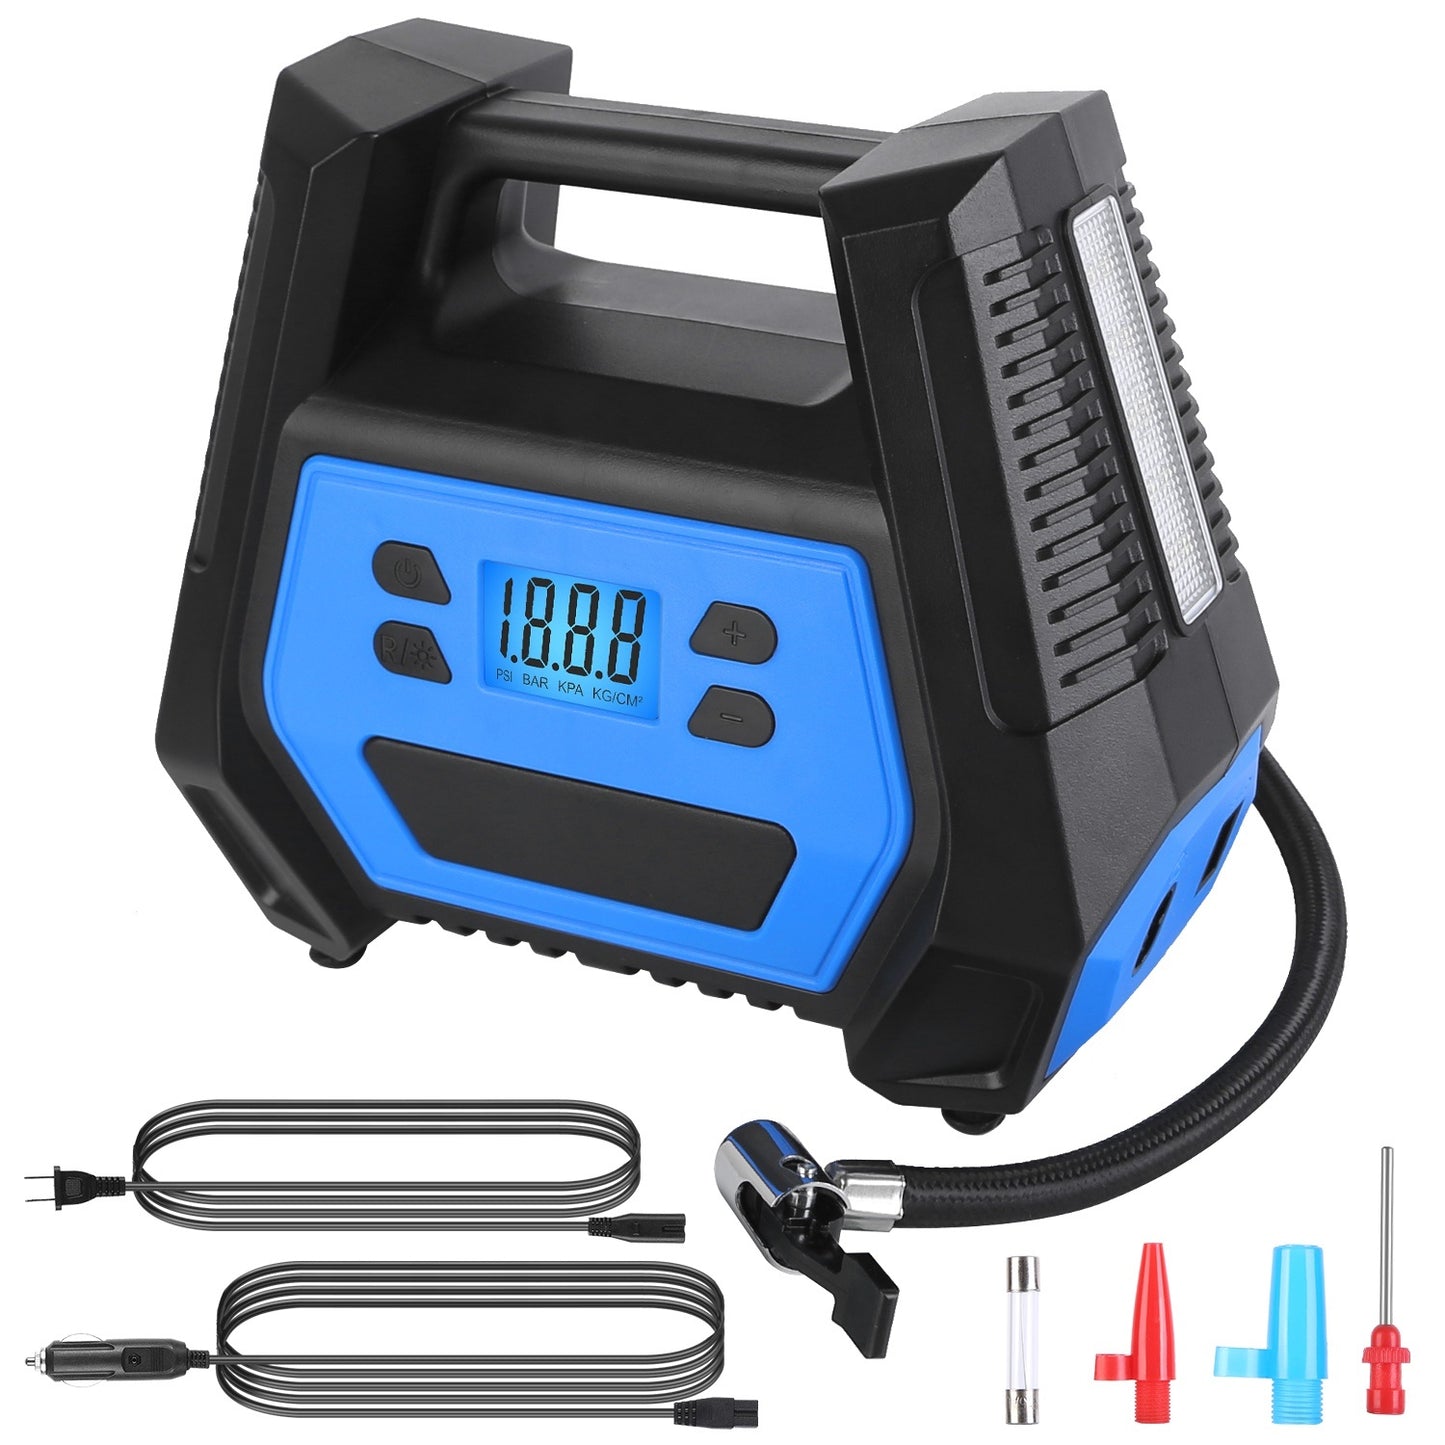 Portable Tire Inflator 150 PSI 120W Max Power Tire Pump with Digital Display LED Light Inflatable Nozzle Needle Fuse Air Compressor for Bikes Motorbikes Cars Balls